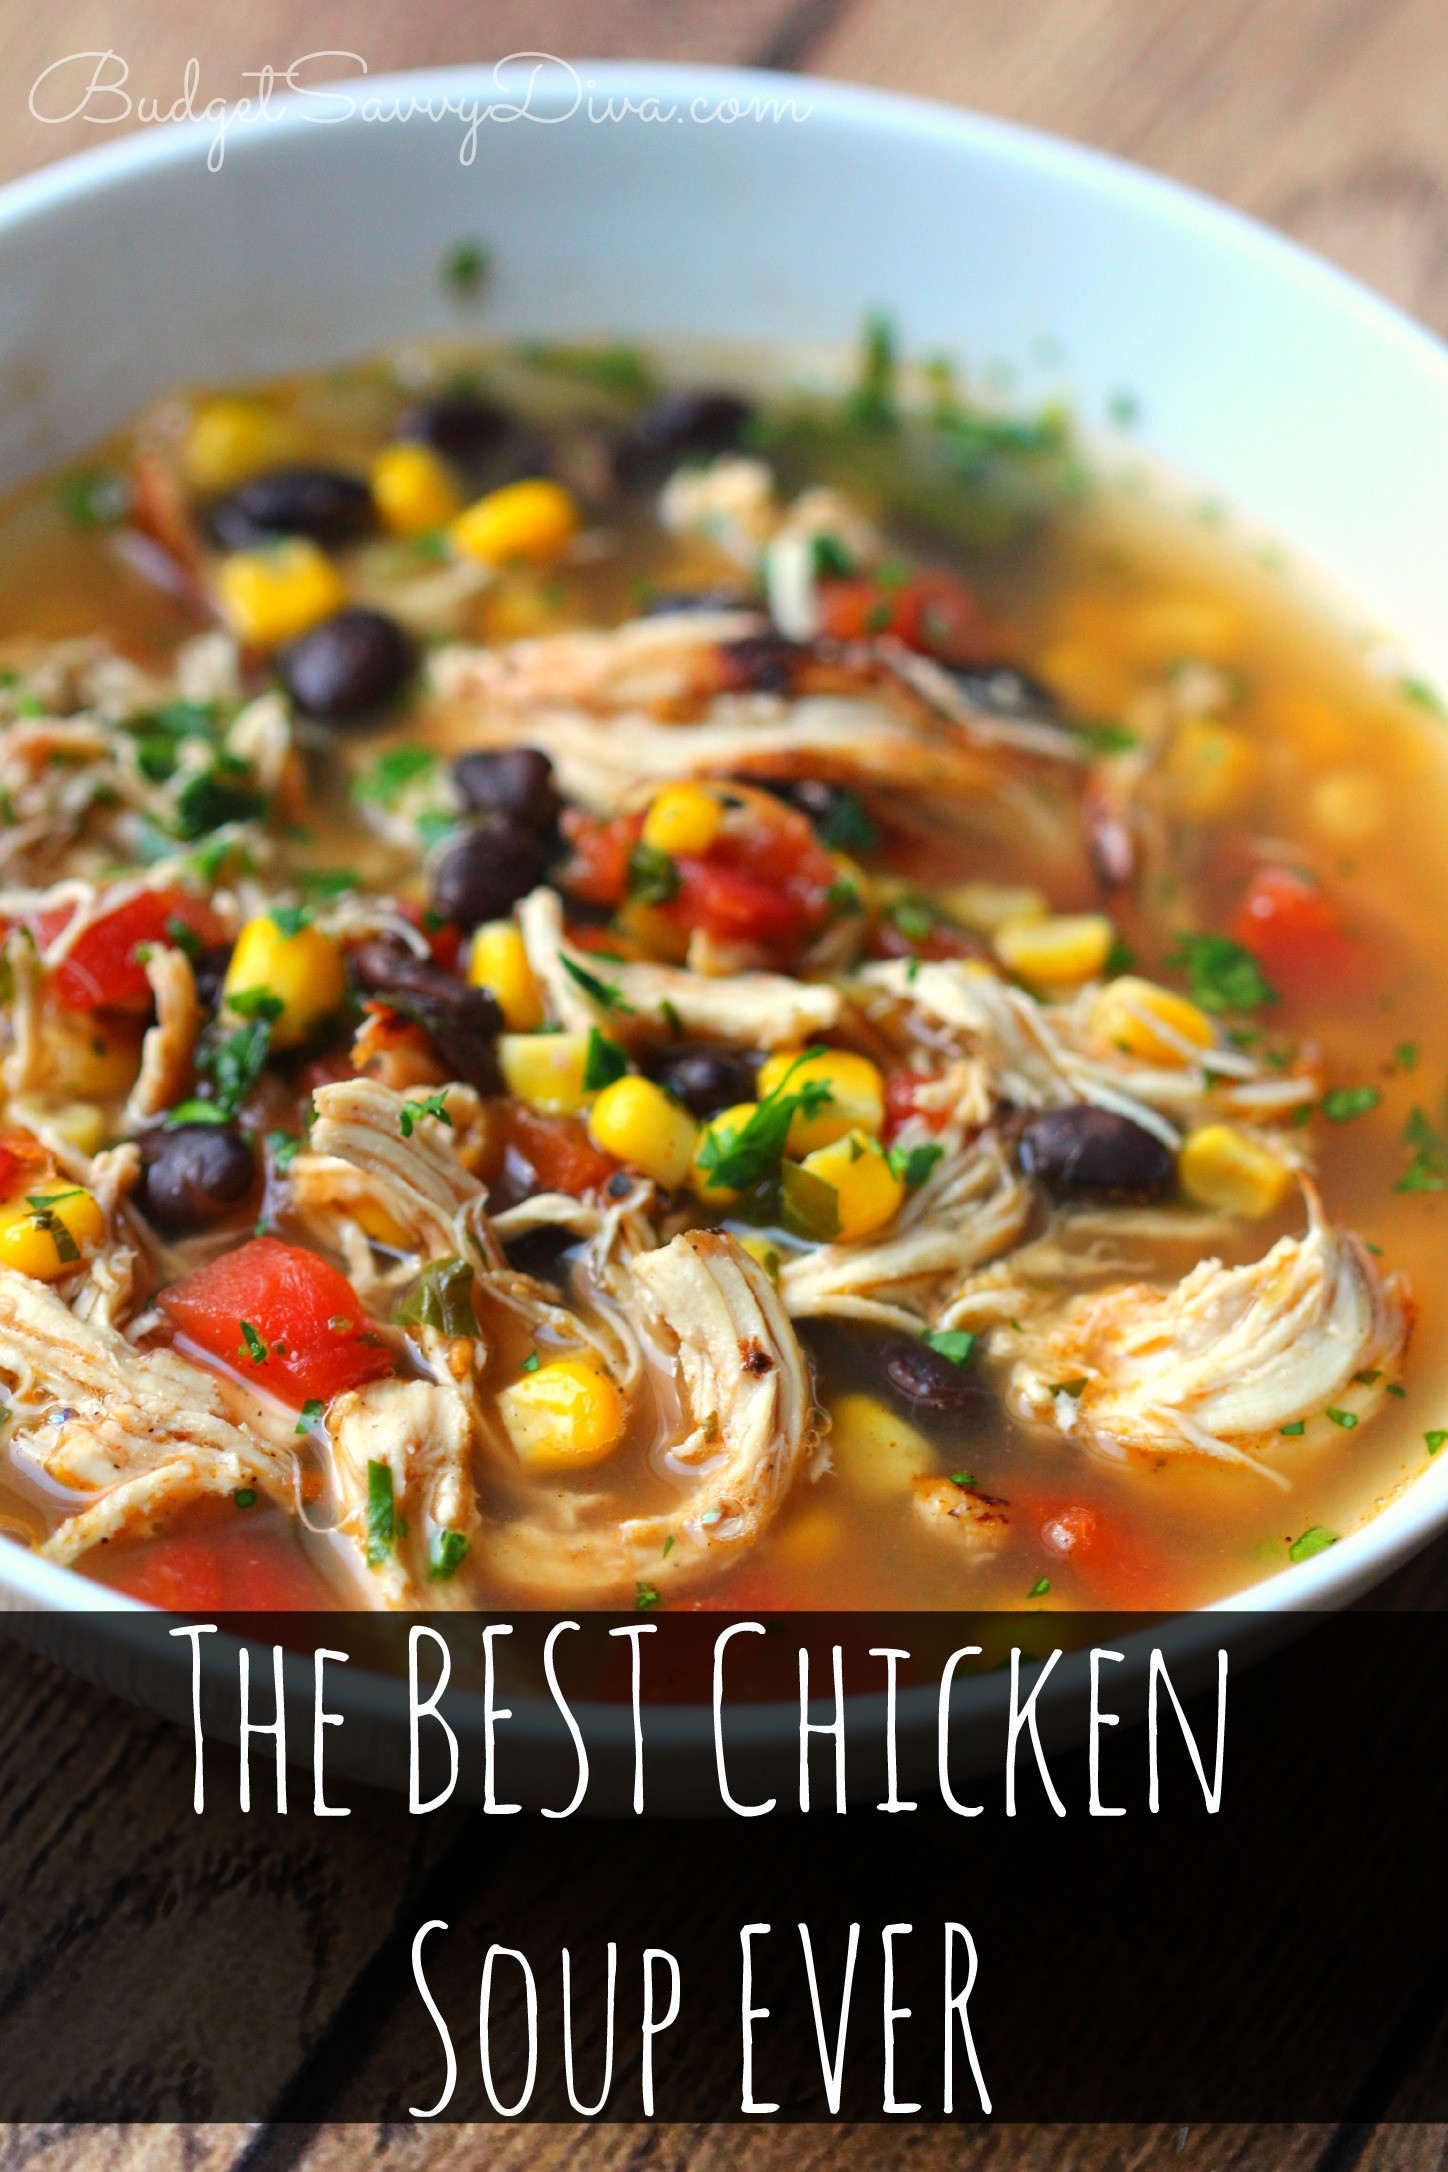 Chicken Soup Recipe For Cold
 The BEST Chicken Soup Ever Recipe Bud Savvy Diva